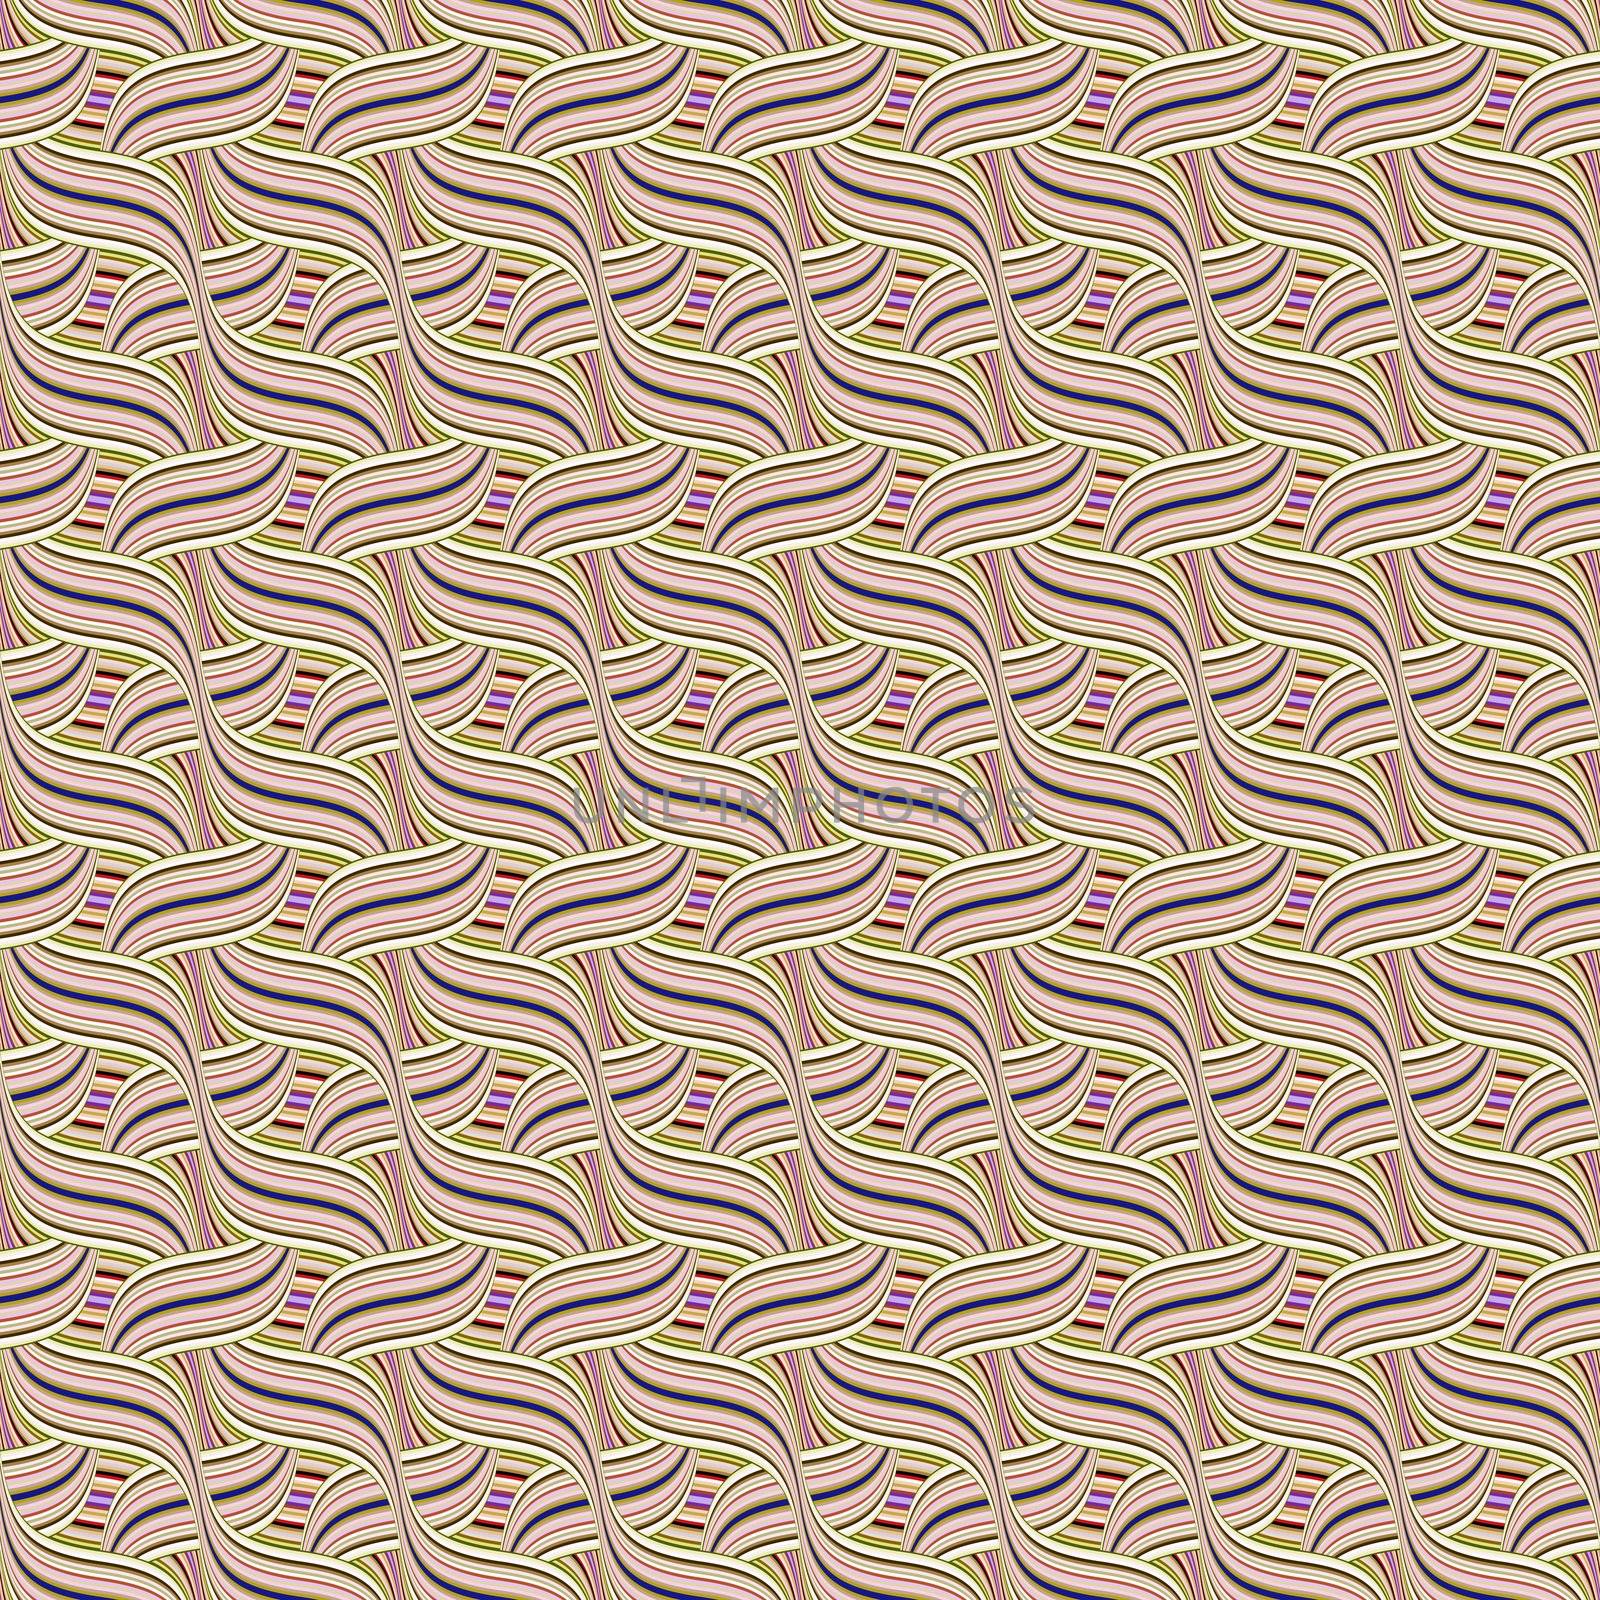 intertwined waves pattern by weknow